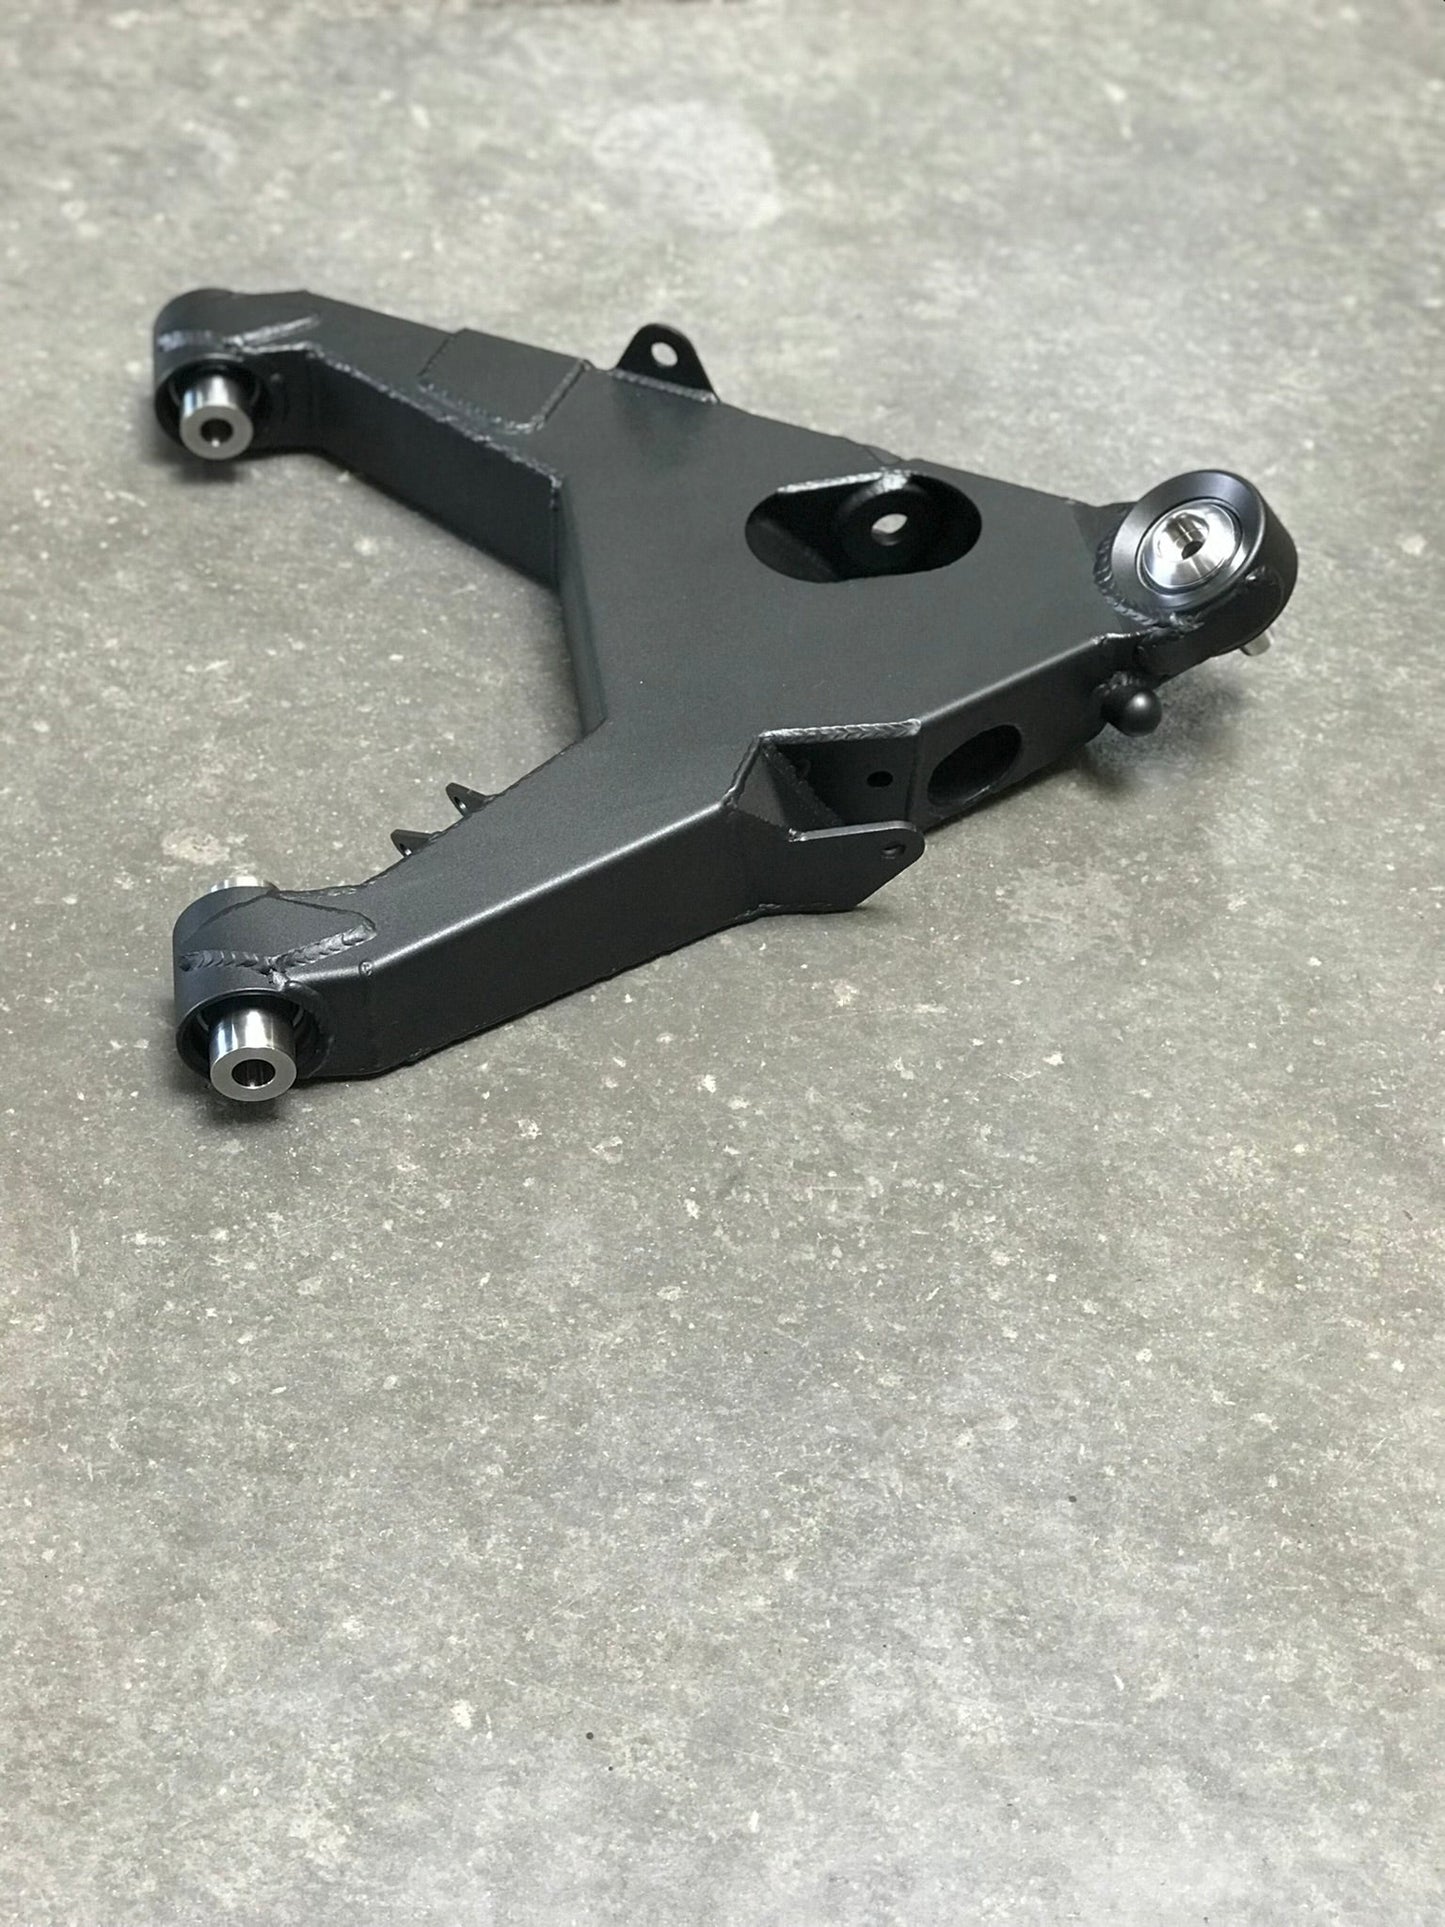 GEN 3 RAPTOR STOCK LENGTH FABRICATED REPLACEMENT LOWER A-ARM KIT